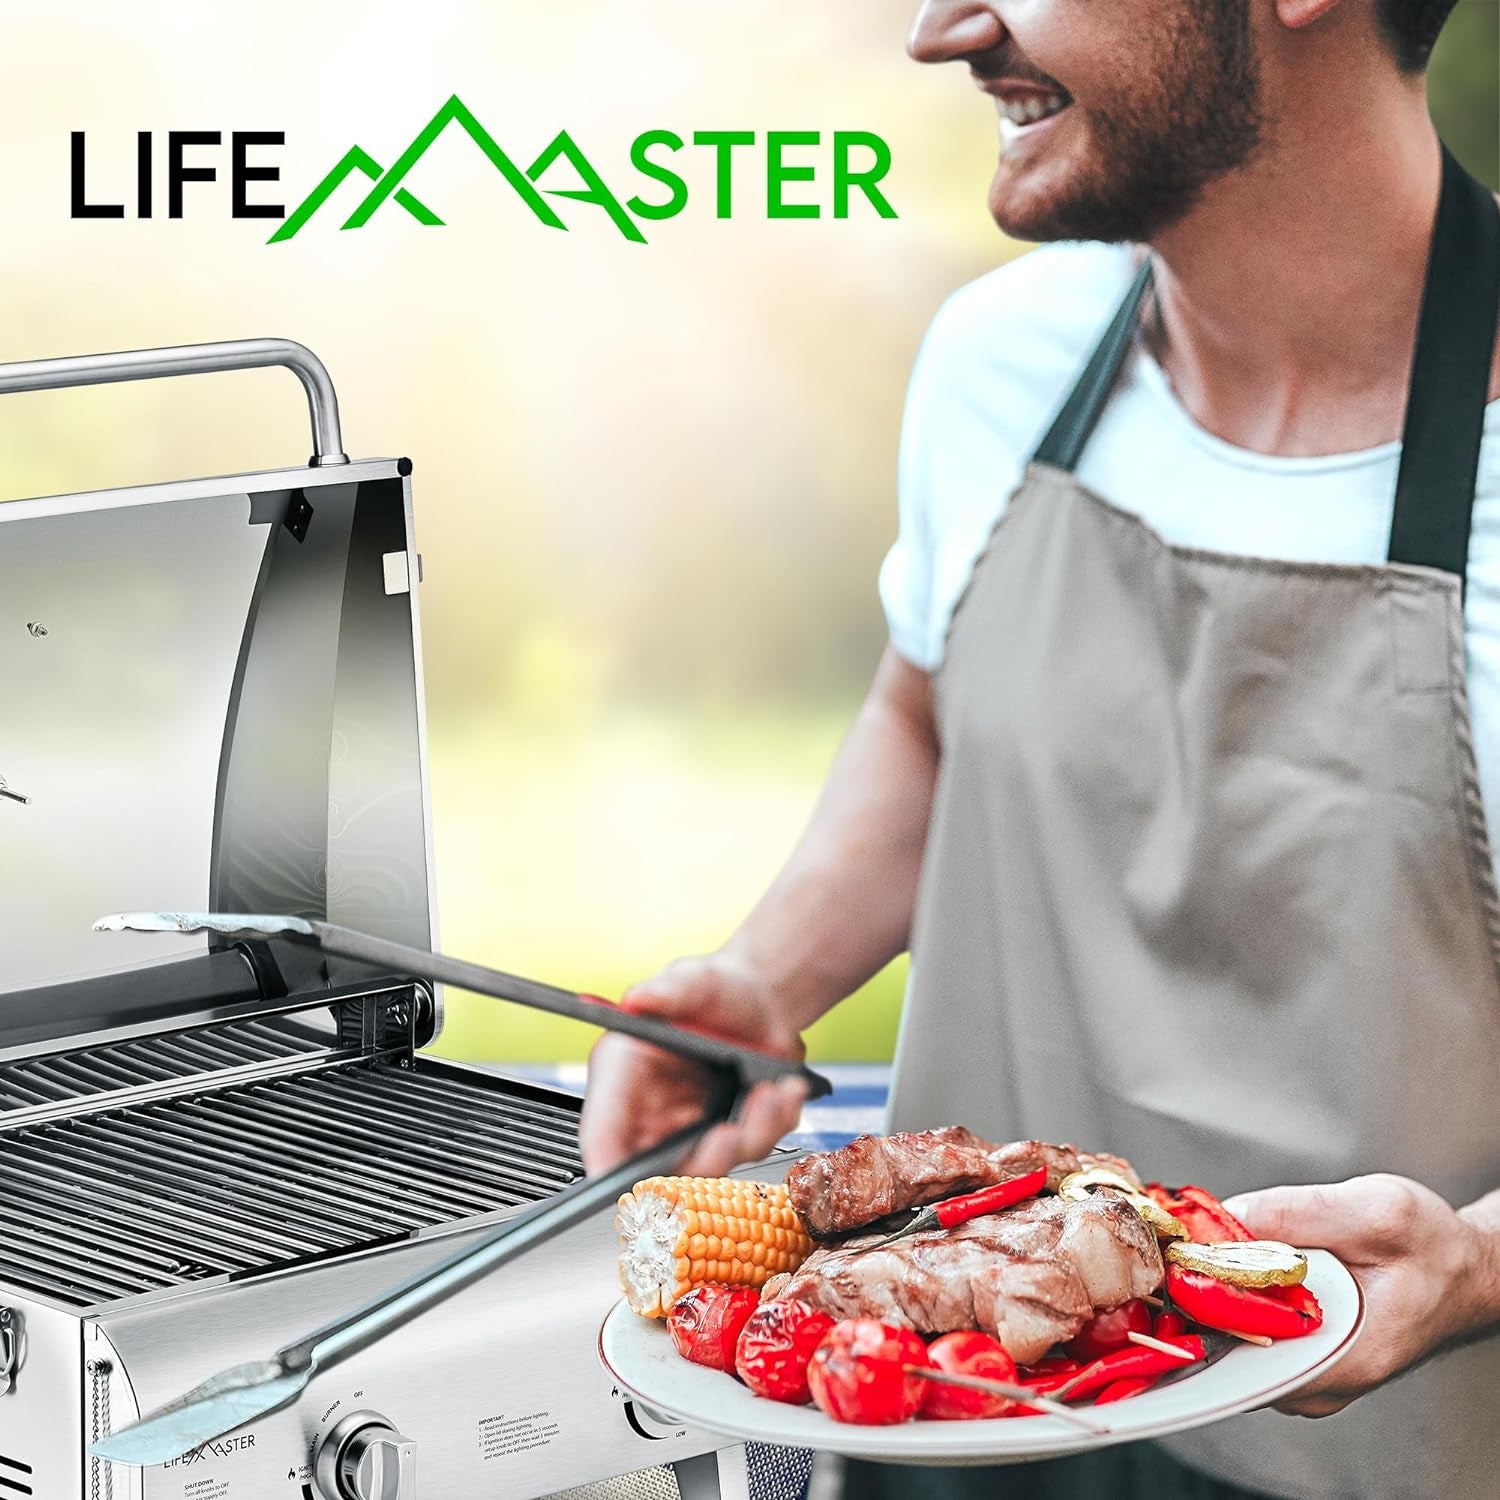 Portable Stainless Steel Gas Grill - 2 Burners Easy Clean Tabletop BBQ Propane Gas Grill with Foldable Legs and Wind Proof Lid for Camping and Outdoor - Silver